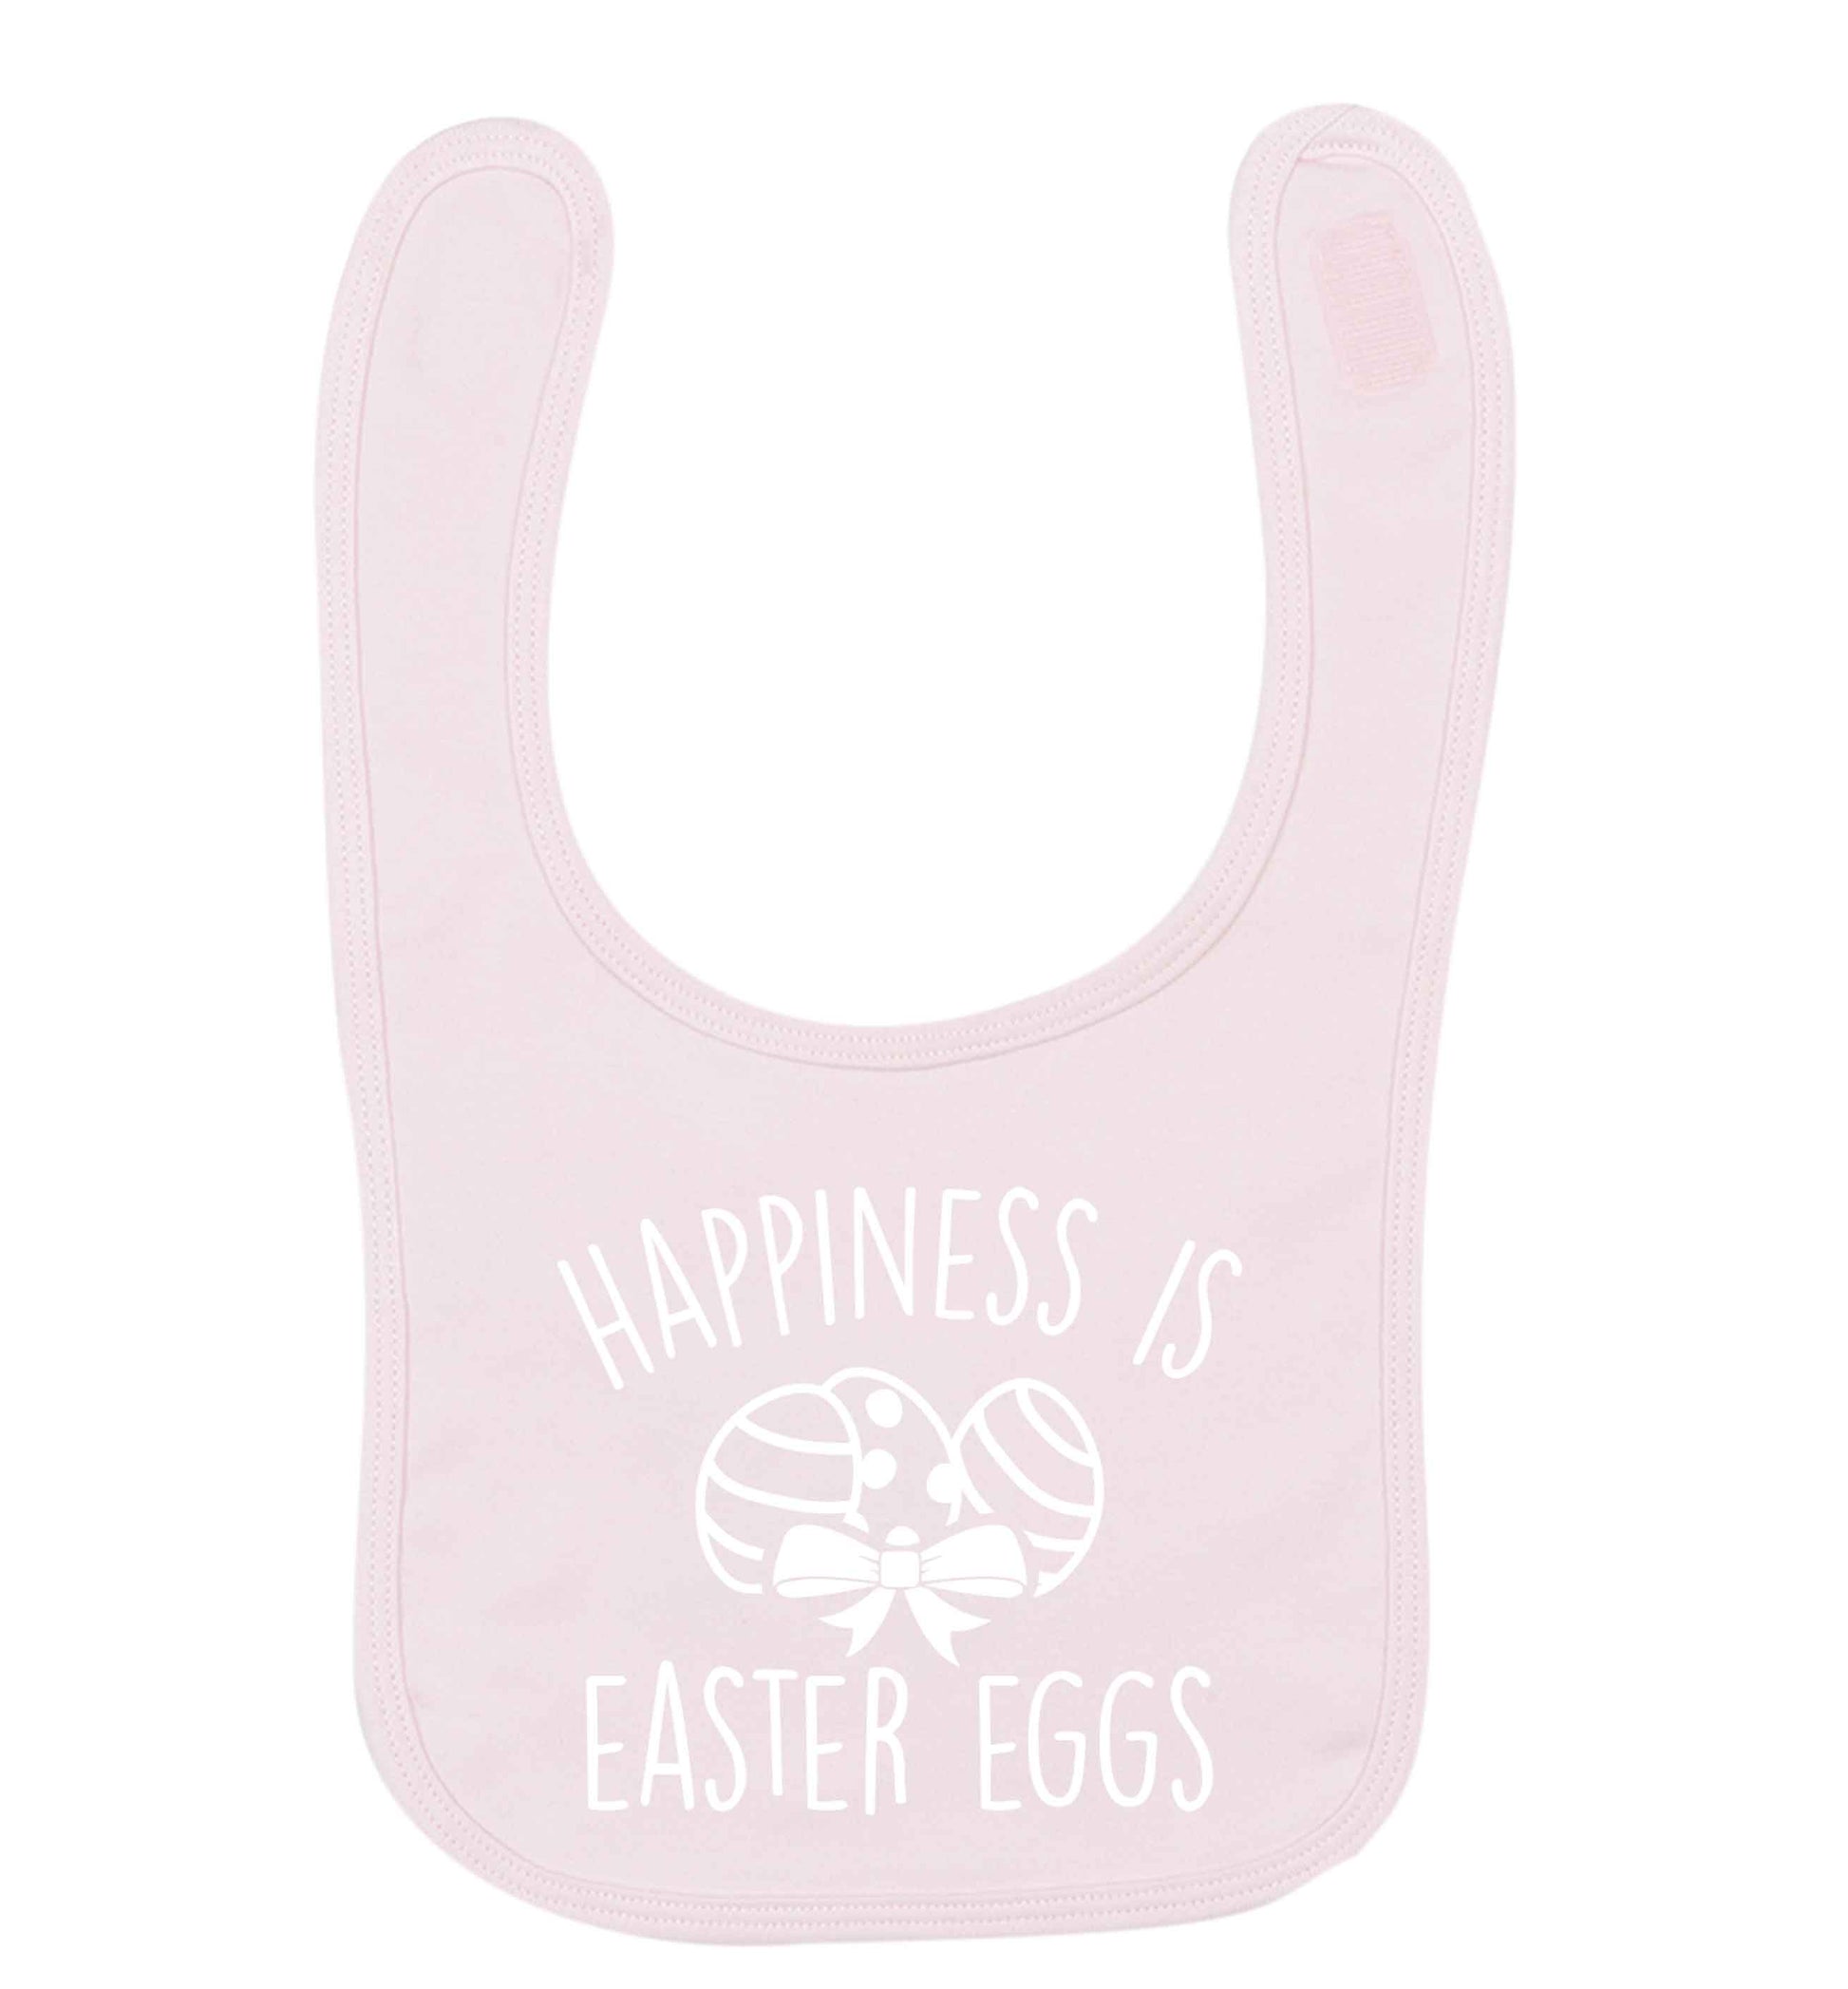 Happiness is Easter eggs pale pink baby bib